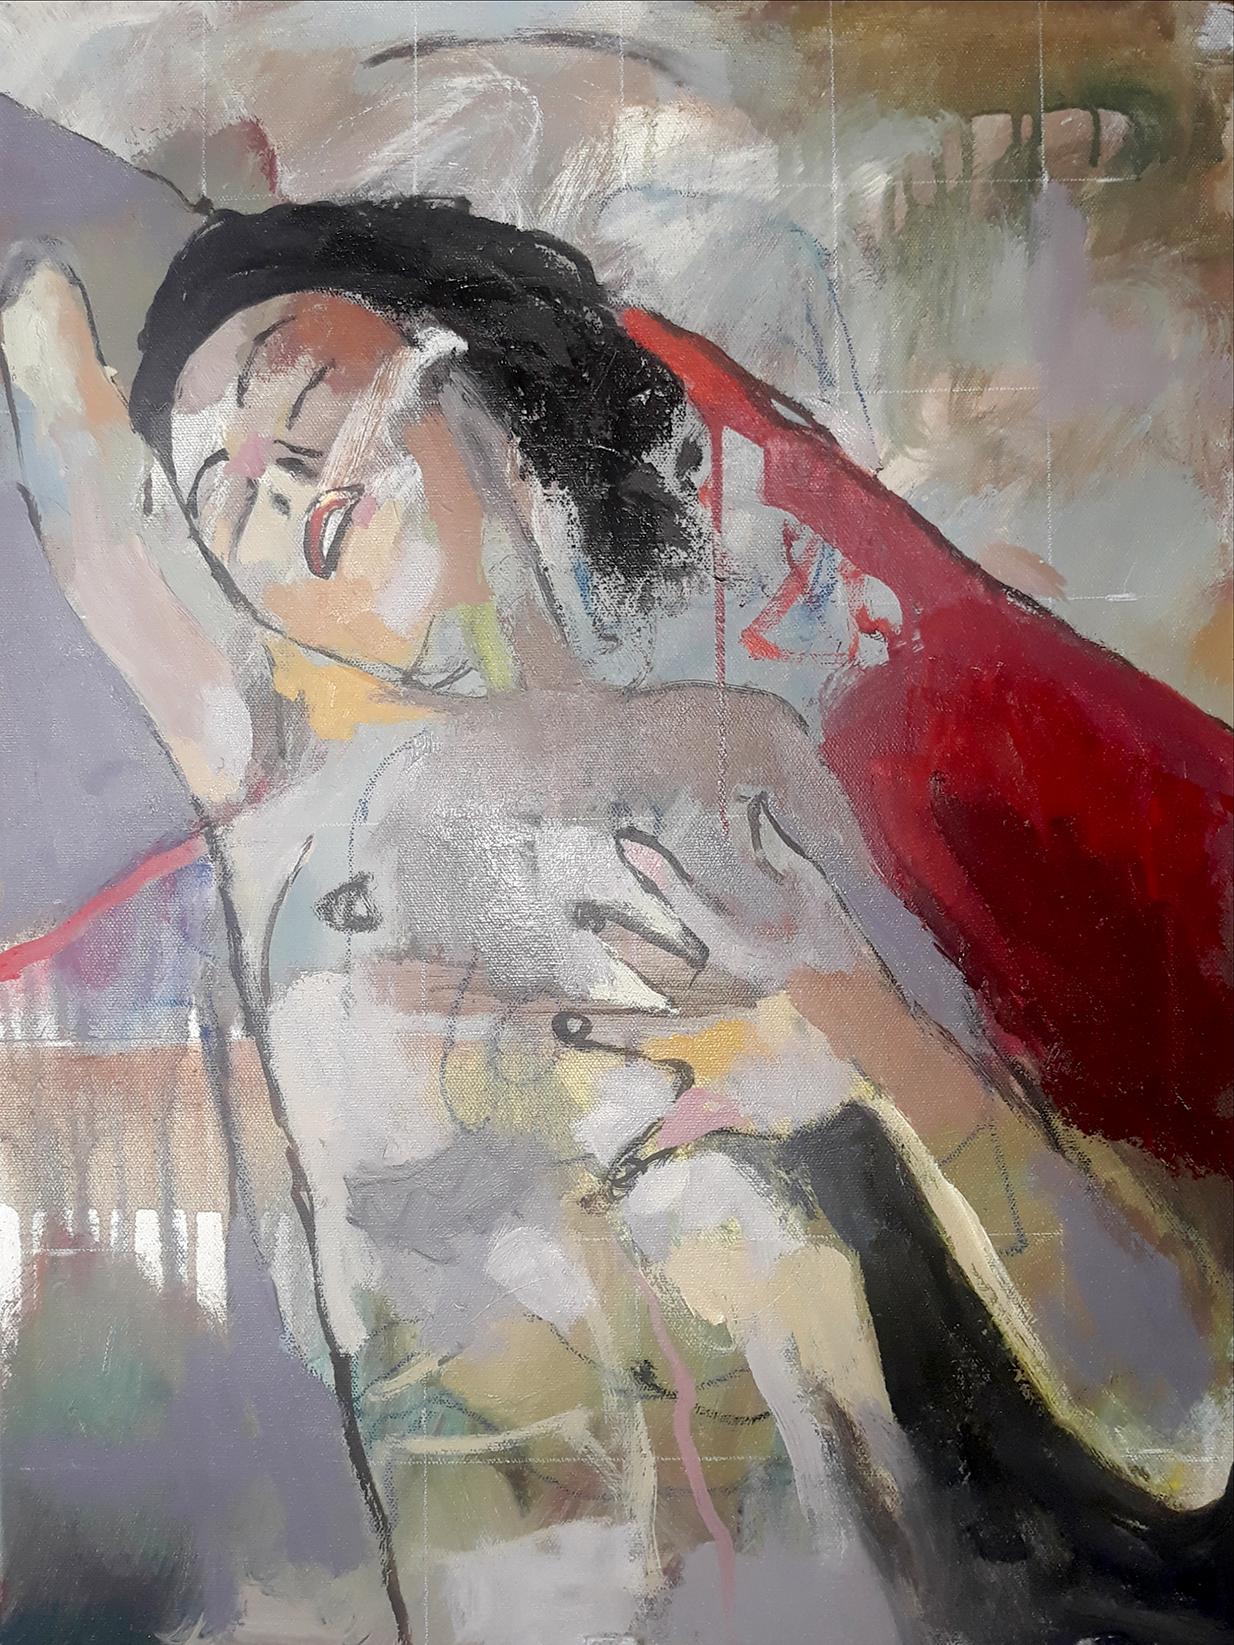 Figurative Painting Tom Bennett - Nothing Lasts, dreamy female figure painting